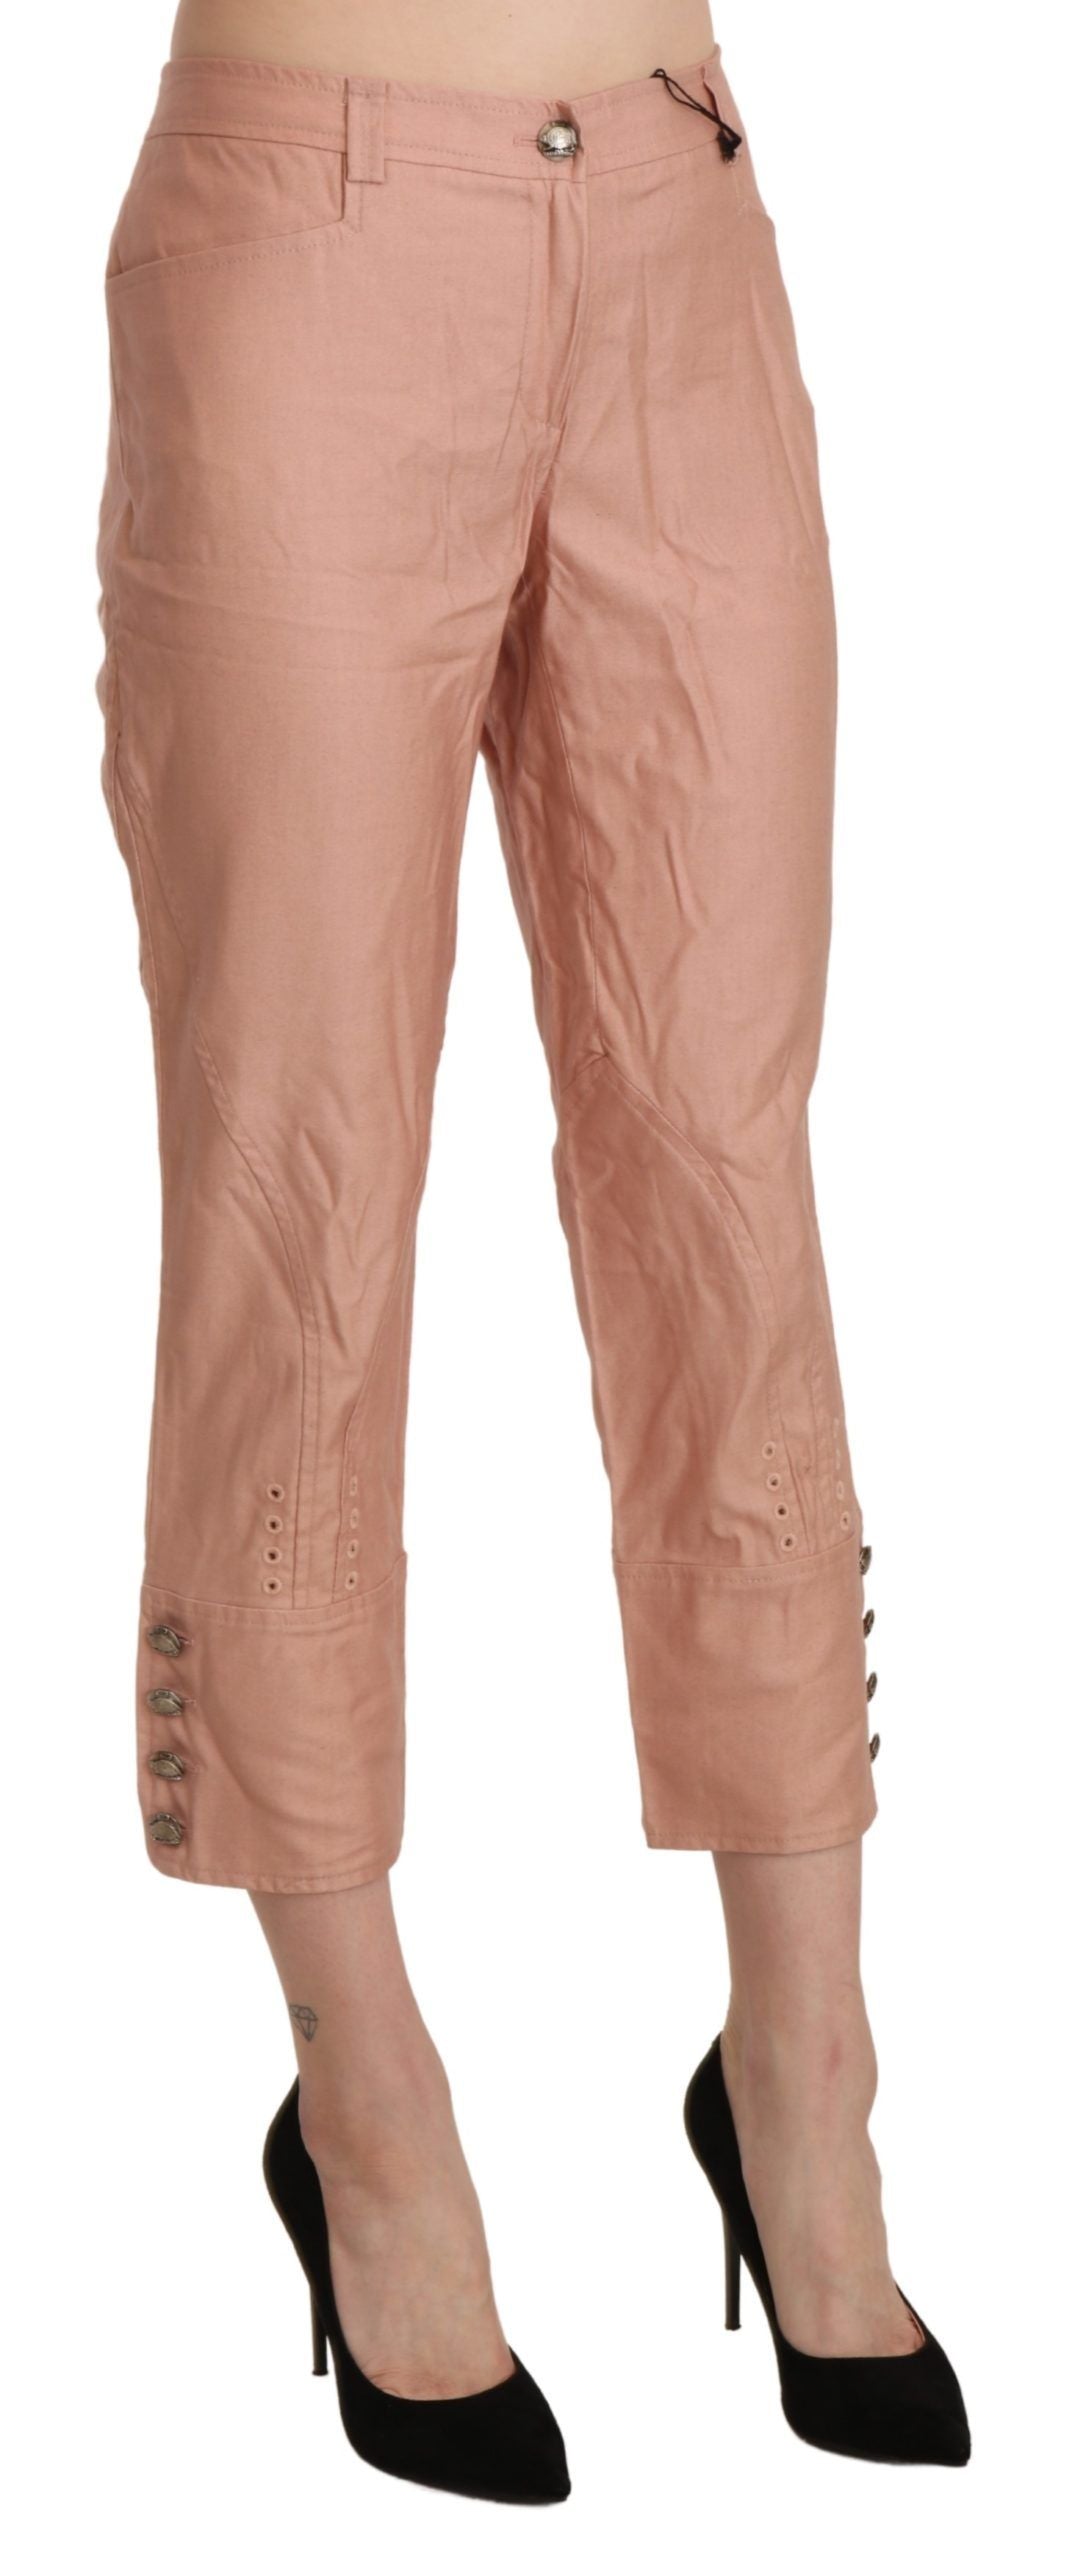 Ermanno Scervino Cotton Pink High Waist Cropped Trouser Pants